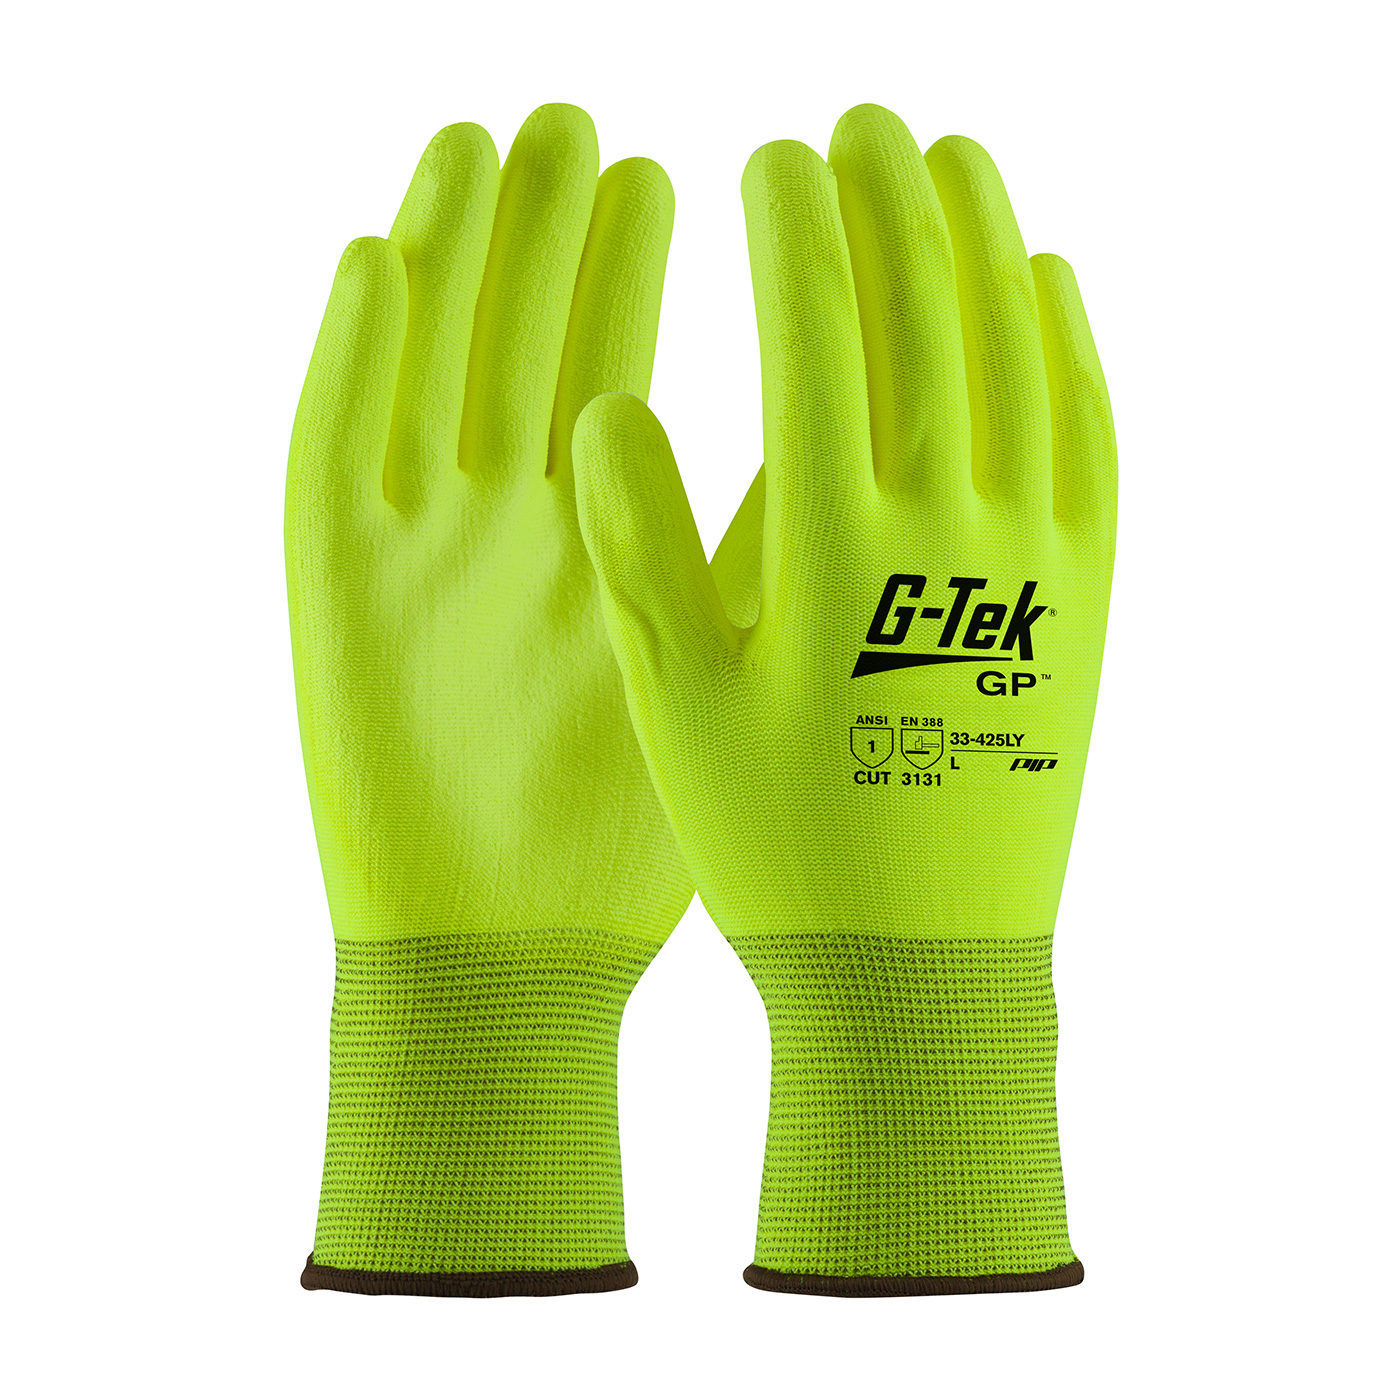 PIP 33-425LY/L G-Tek GP Hi-Vis Seamless Knit Polyester Glove with Polyurethane Coated Smooth Grip on Palm & Fingers - Large PID-33 425LY L